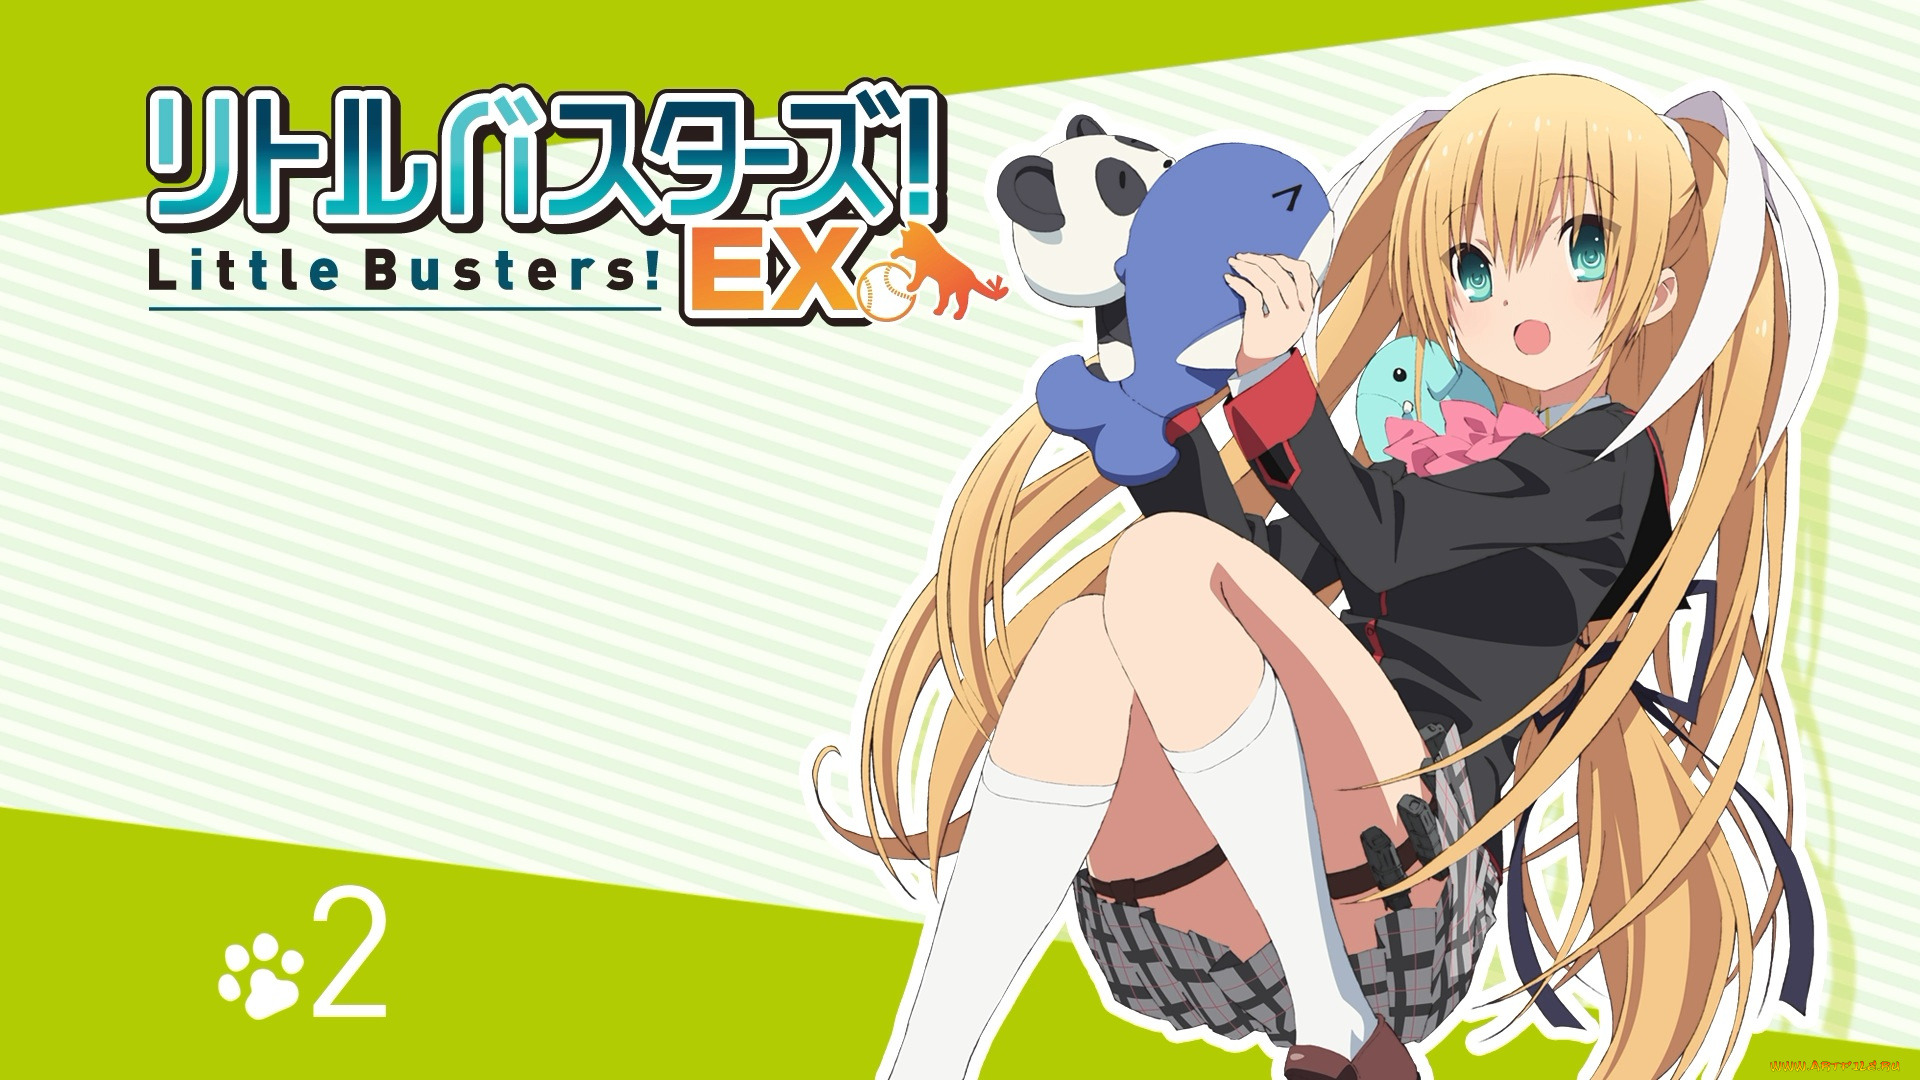 аниме, little, busters, девушка, взгляд, игрушки, little, busters, tokido, saya, tagme, artist